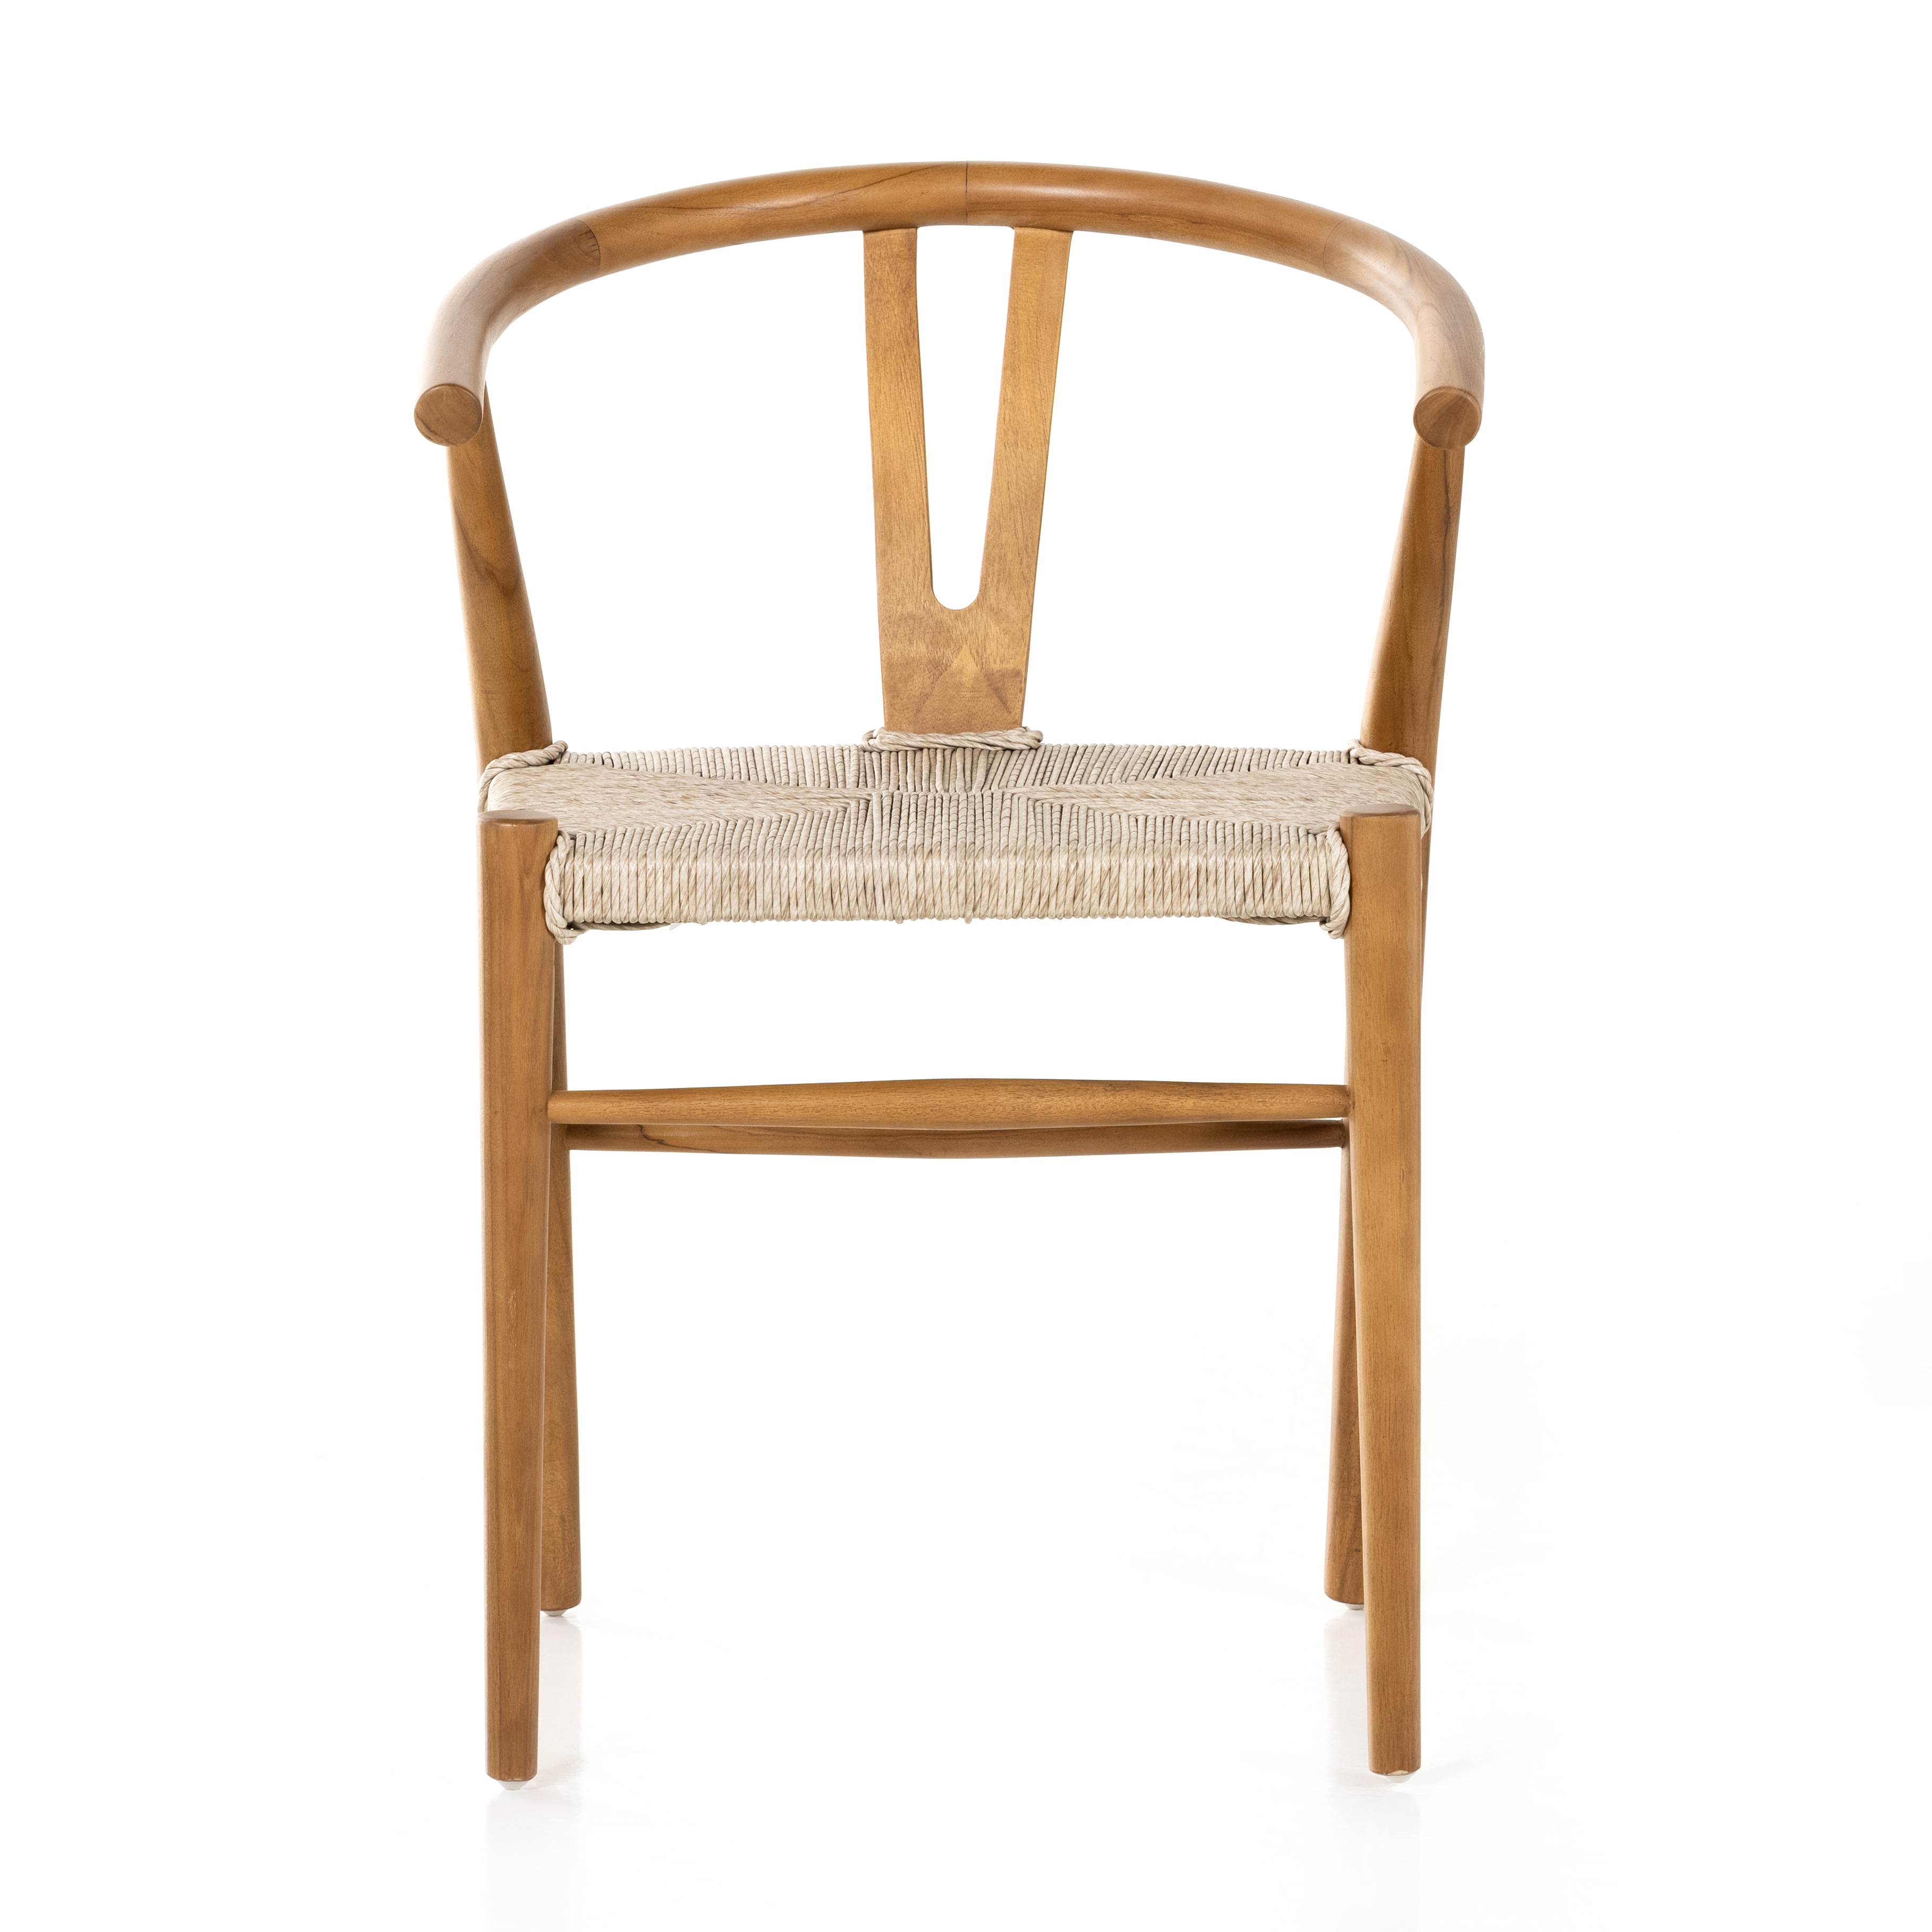 Muestra Dining Chair-Natural - Image 2